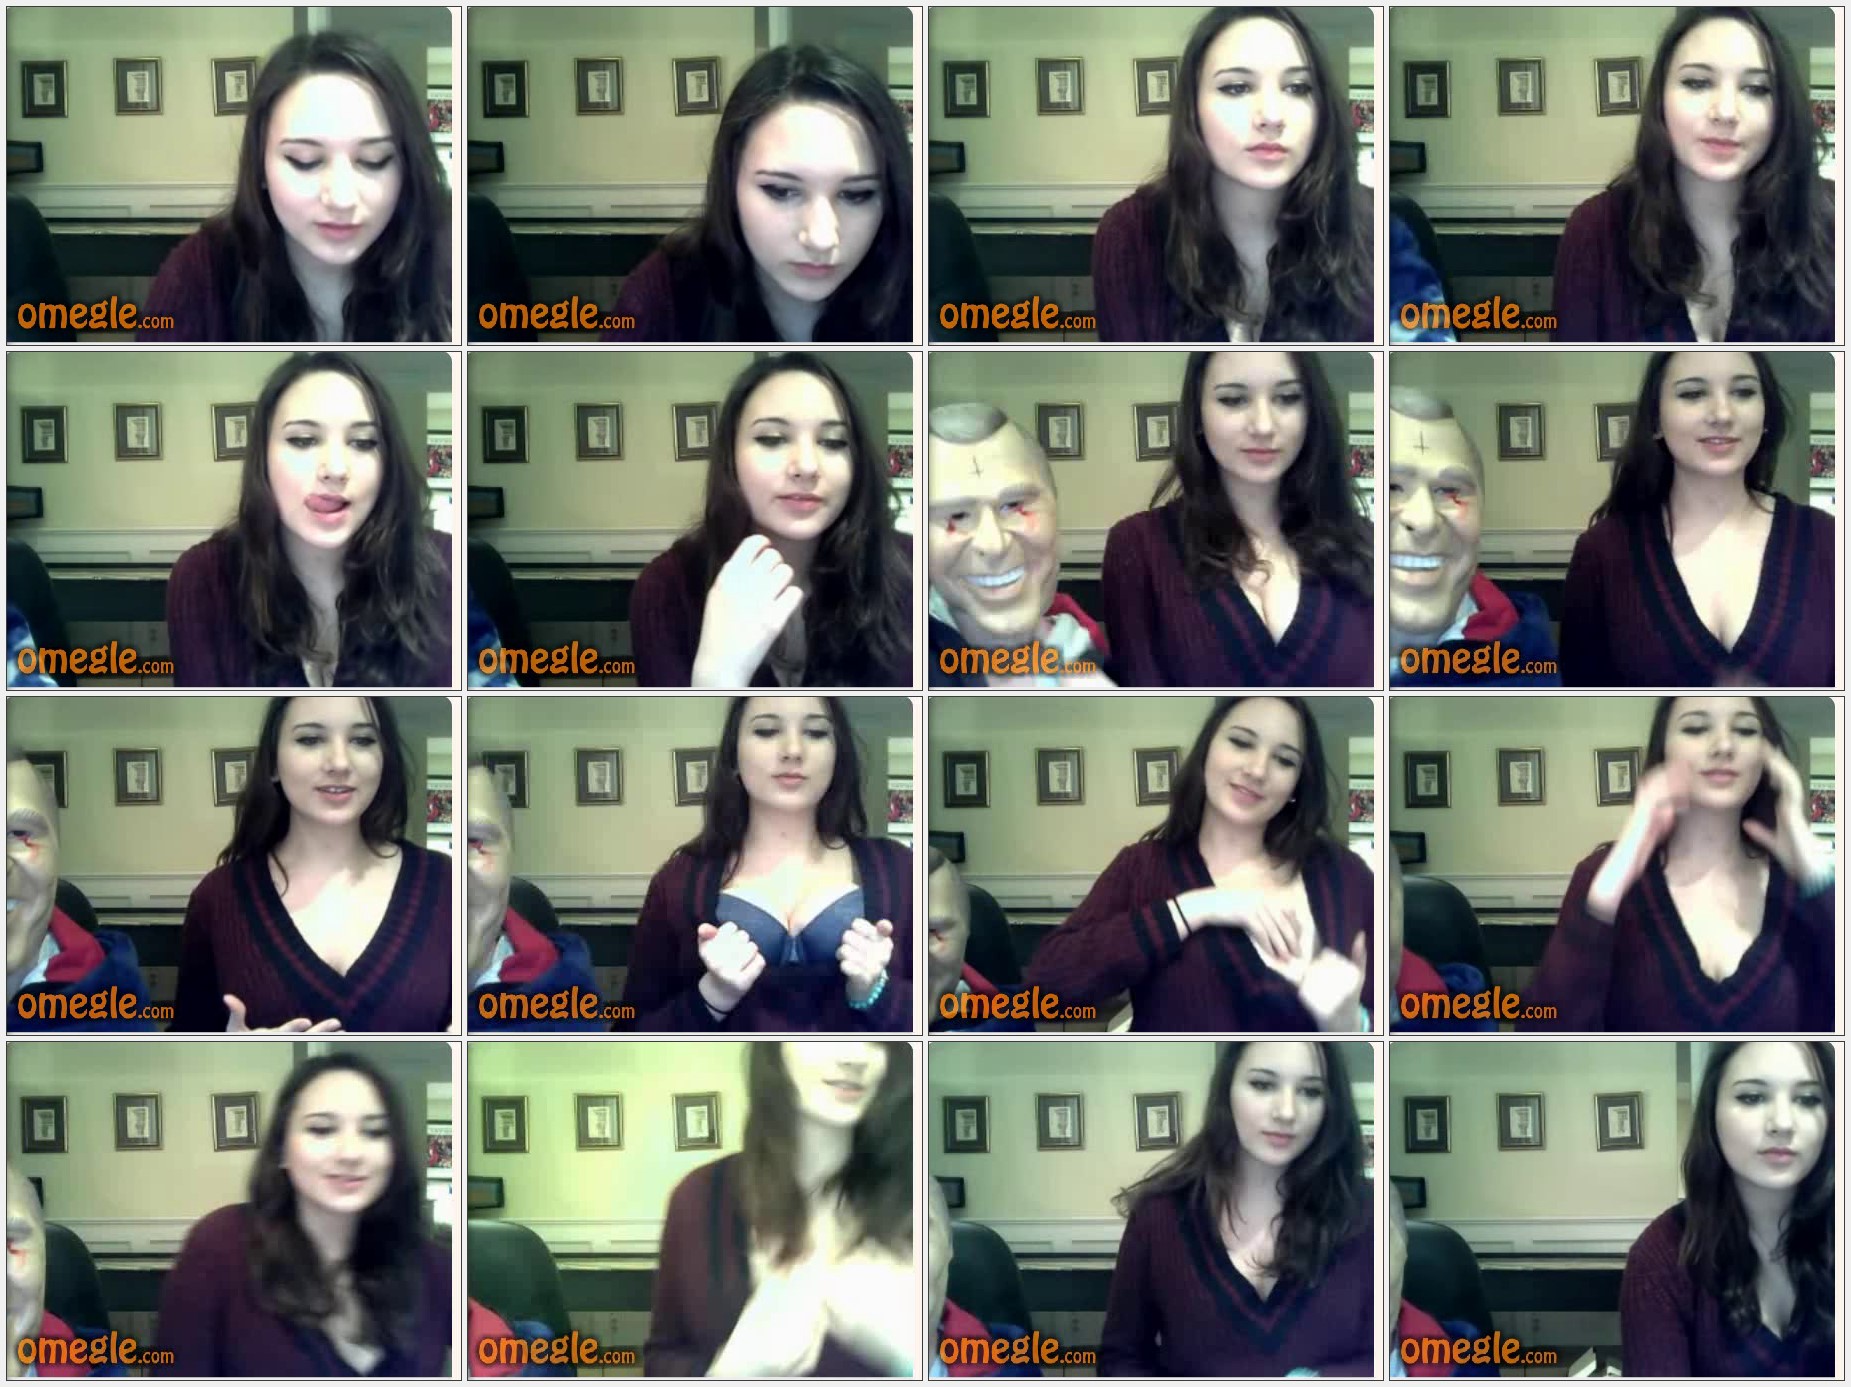 RE: Omegle Collection - Young Girls Tricked On Omegle. 